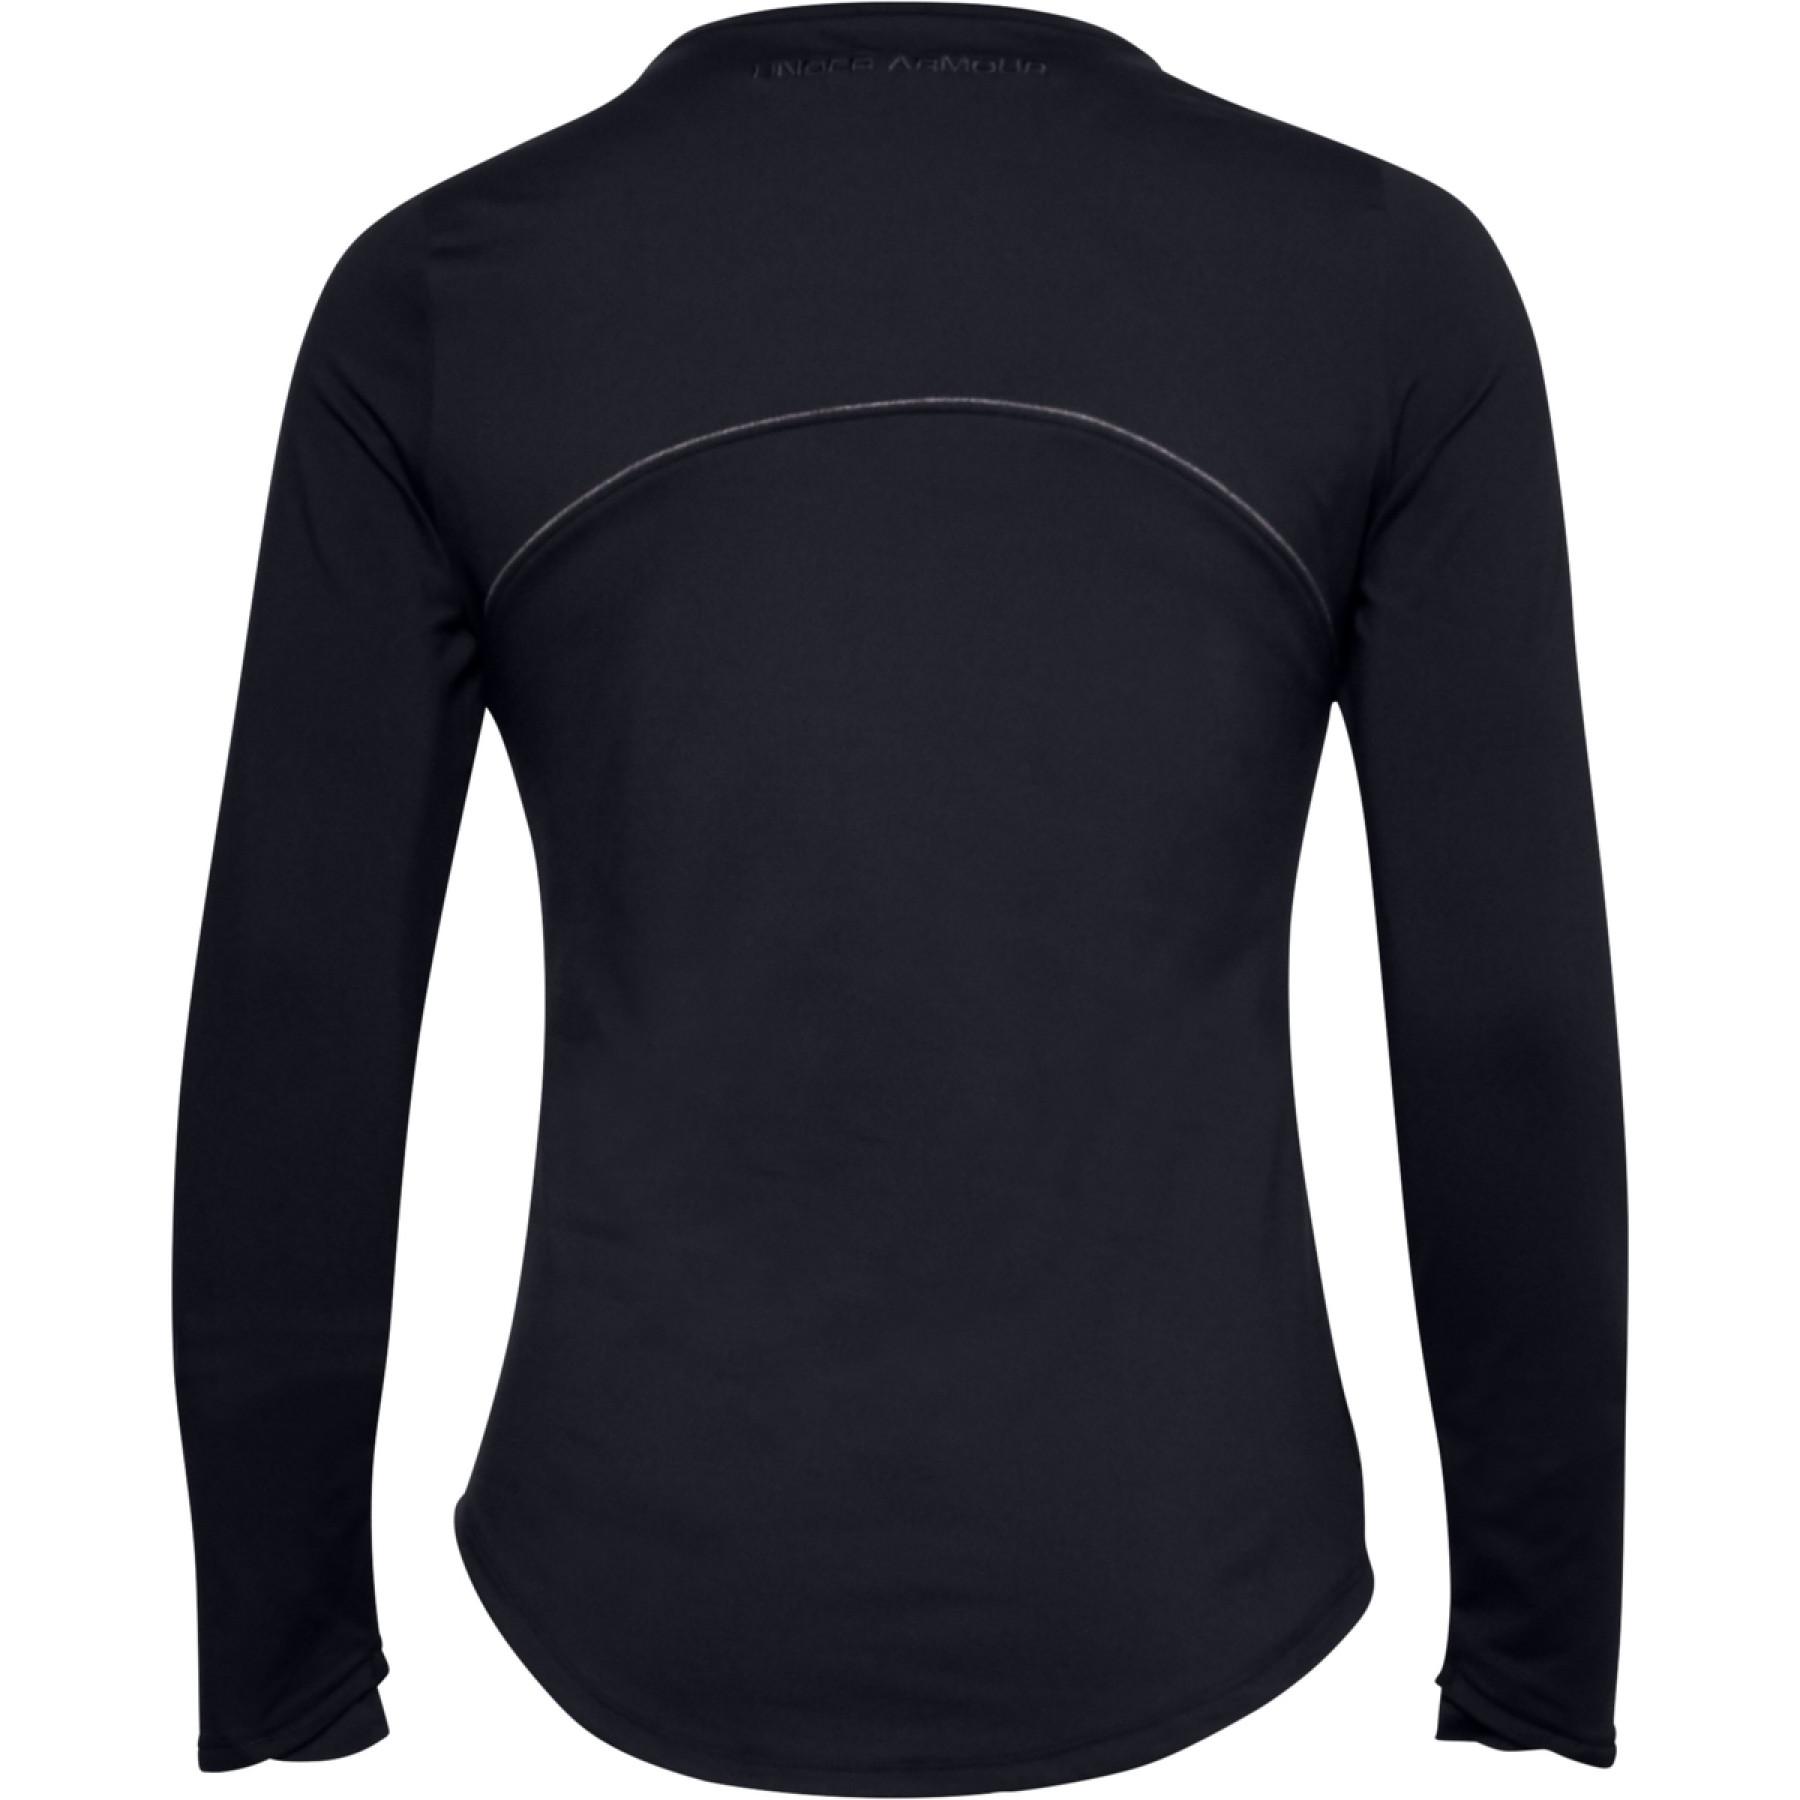 Maillot femme Under Armour à manches longues HydraFuse Crew